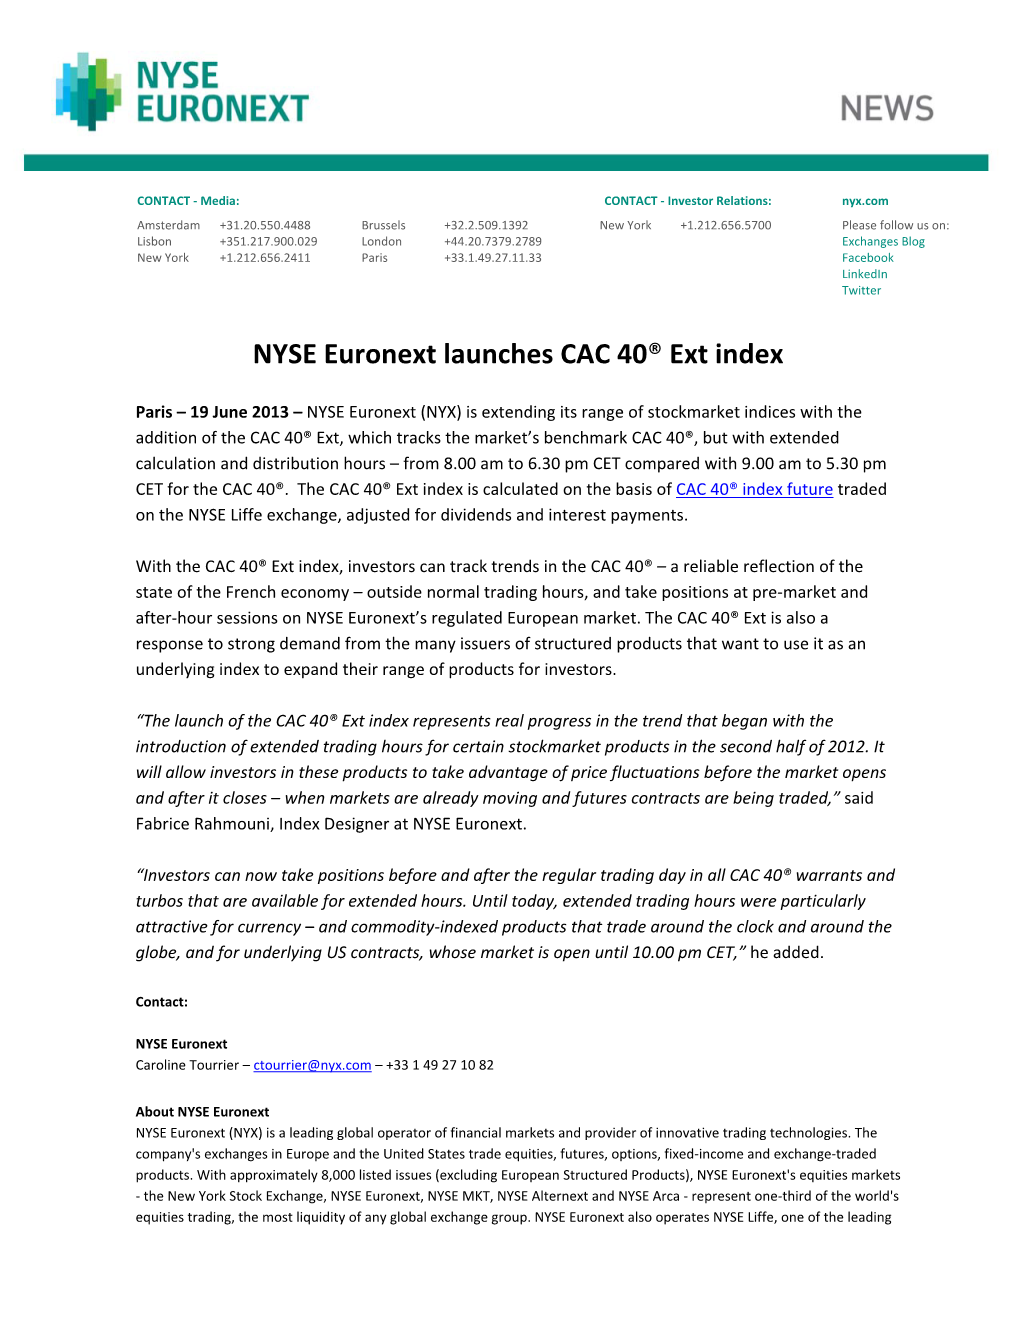 NYSE Euronext Launches CAC 40® Ext Index